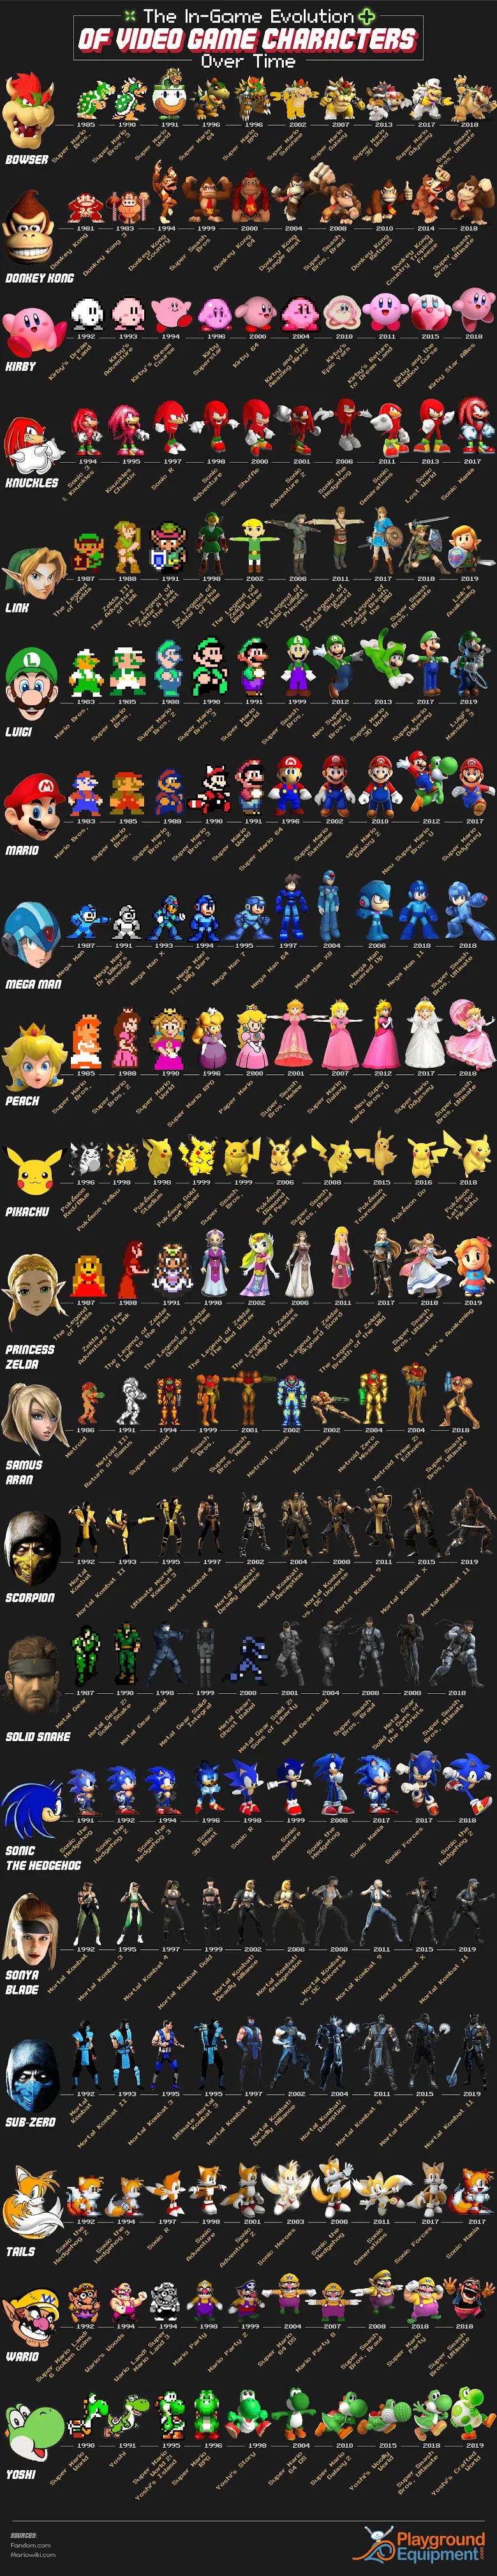 The In-Game Evolution of Video Game Characters Over Time